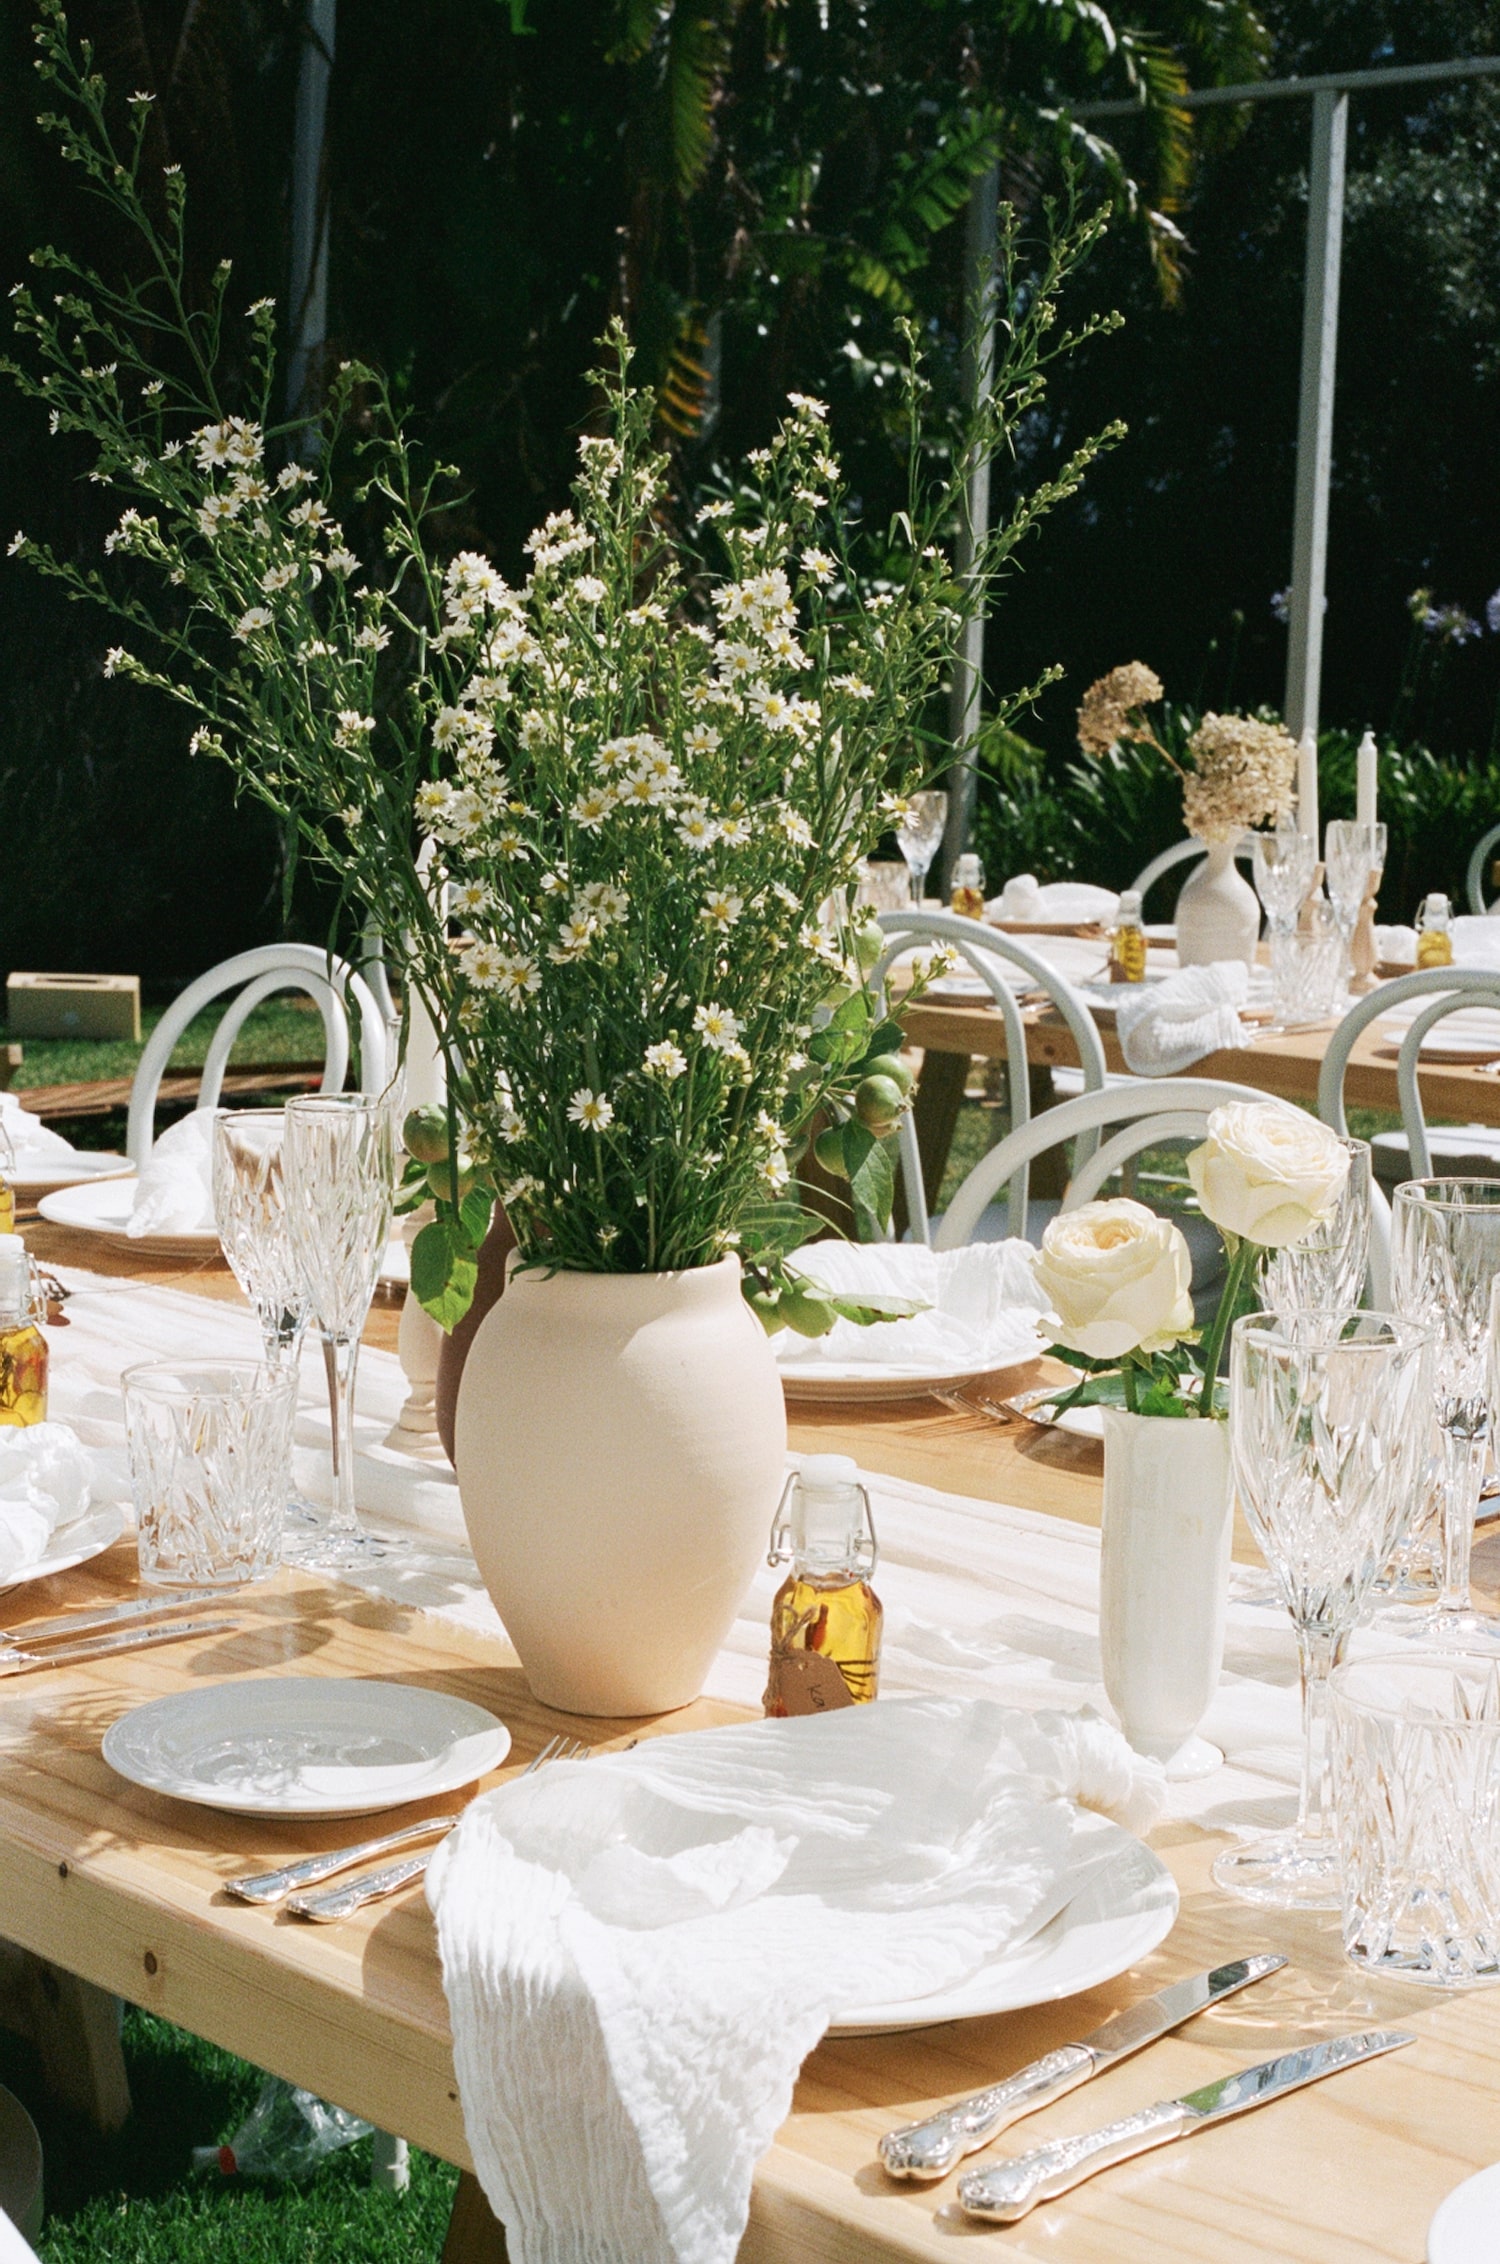 Table setting - soft neutral tones and handpicked/organic style florals